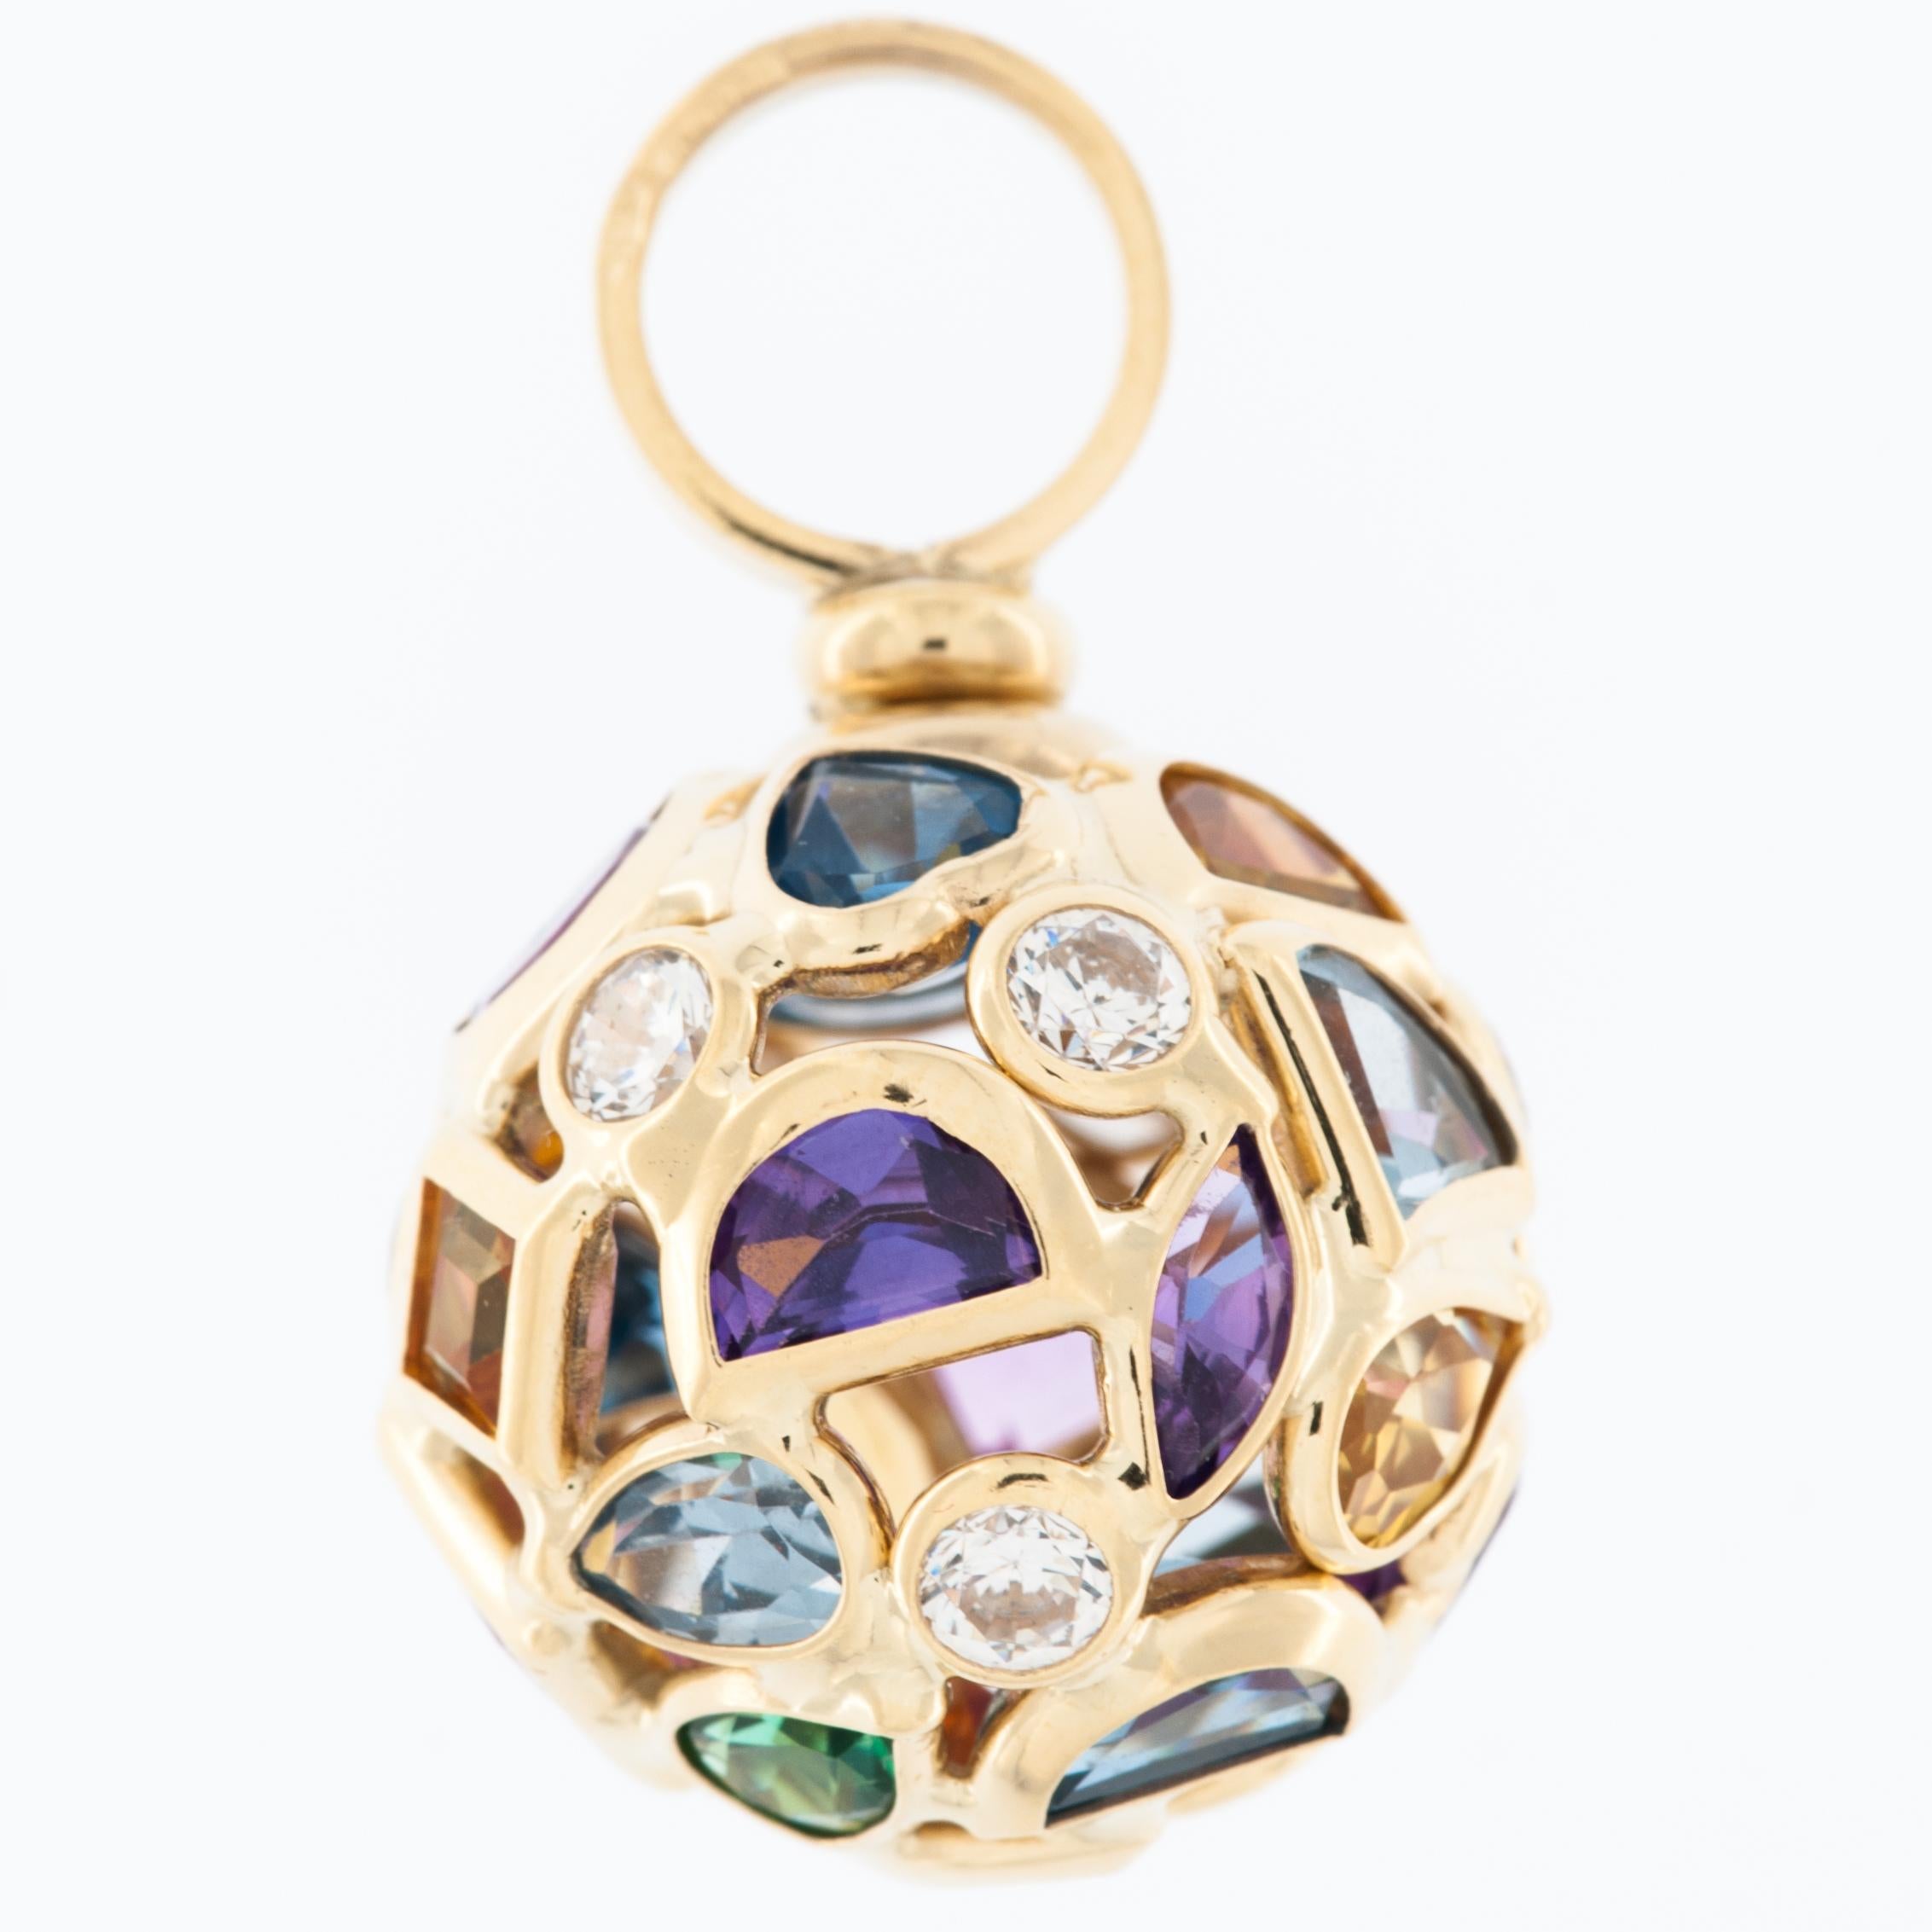 The Fashion Multi-Gem 18kt Yellow Gold Ball Pendant is a stunning and luxurious piece of jewelry that seamlessly blends elegance with contemporary style. Crafted with precision and attention to detail, this pendant is a true work of art.

At its